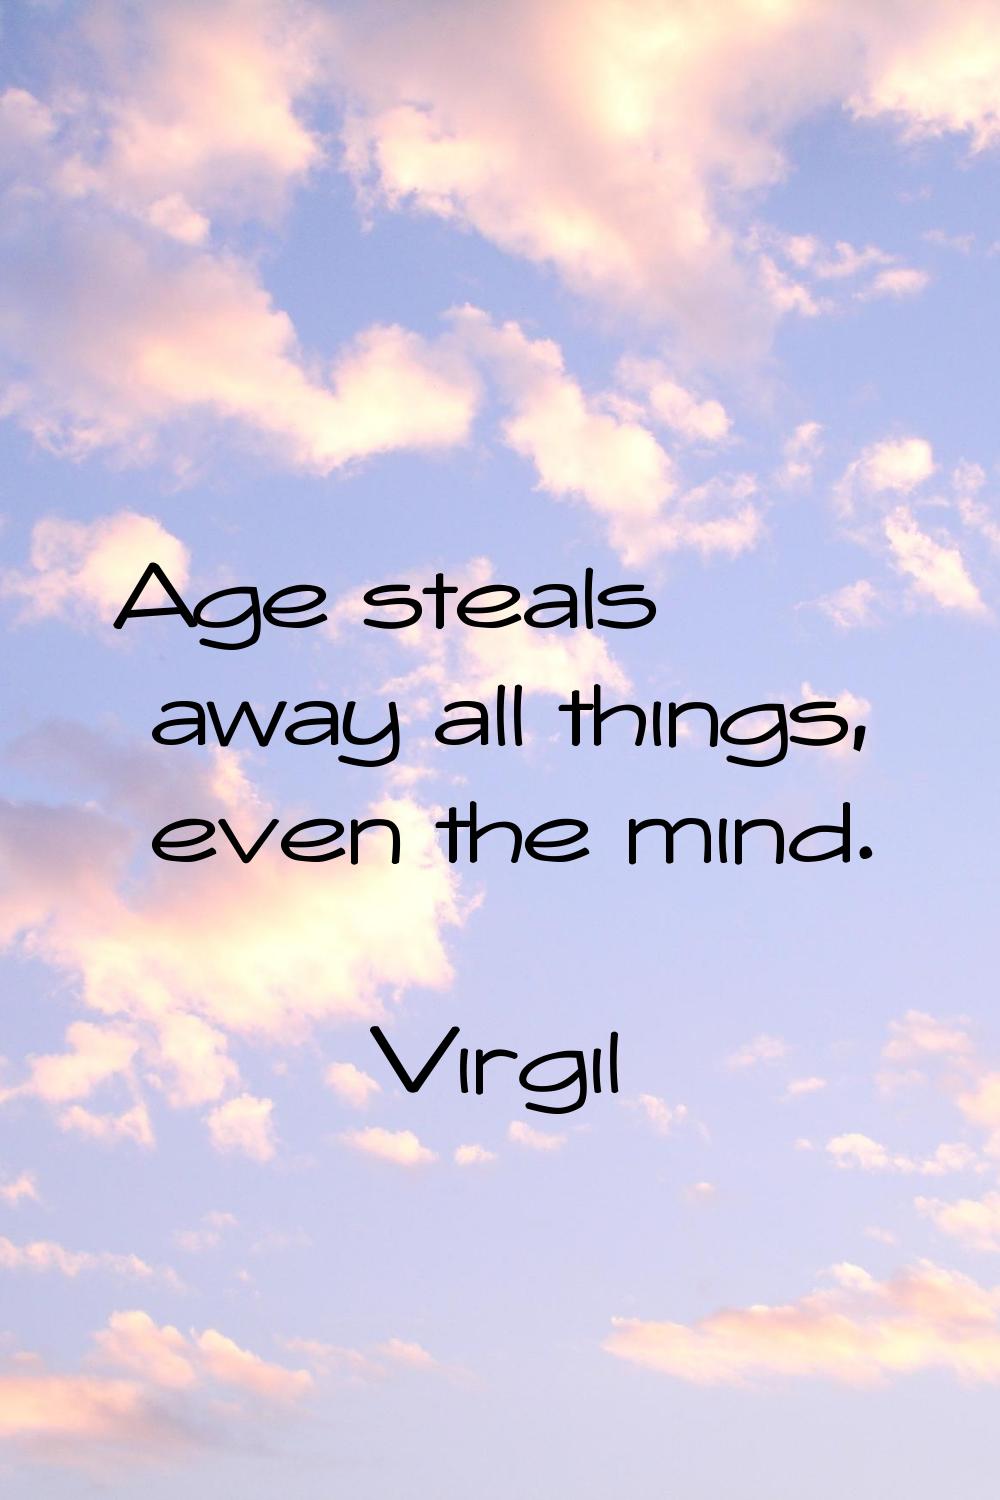 Age steals away all things, even the mind.